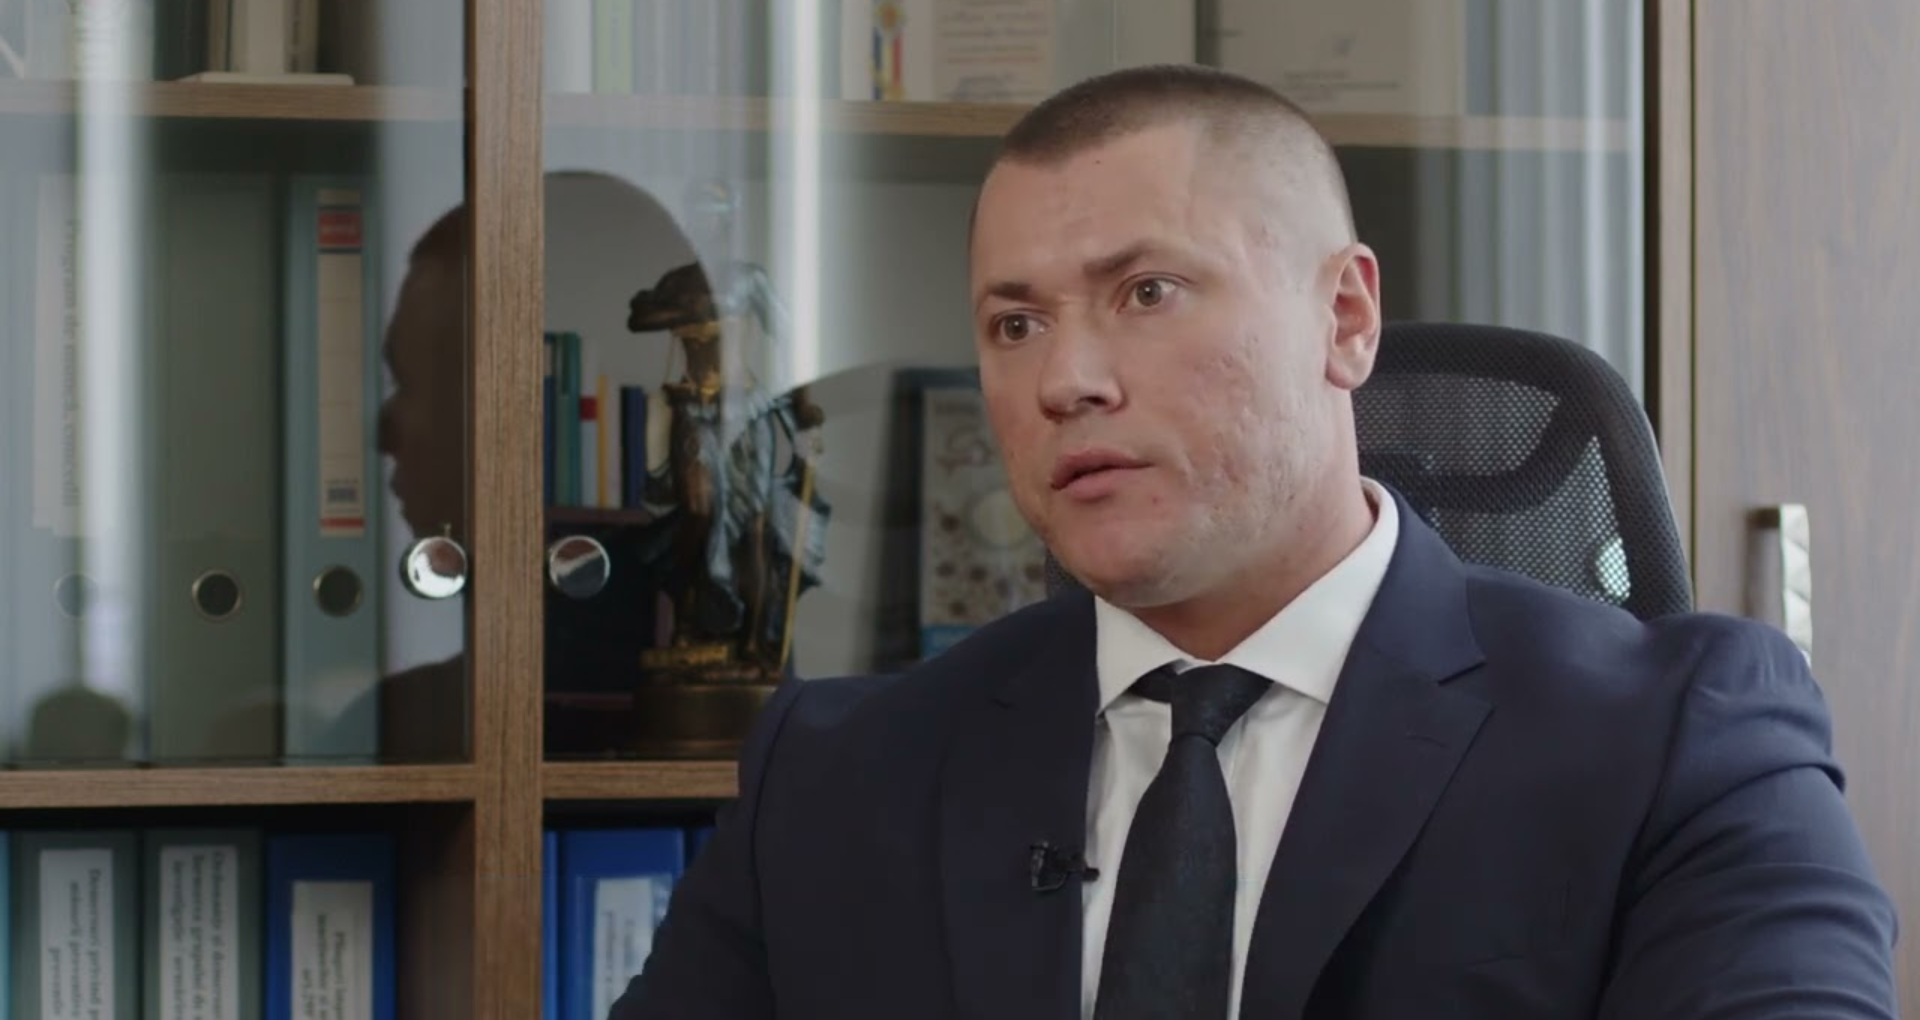 “Absolute distrust”: Igor Demciucin, candidate for Prosecutor General, has been dismissed from the position of Ion Munteanu’s deputy, at the request of the acting head of the Prosecutor General’s Office